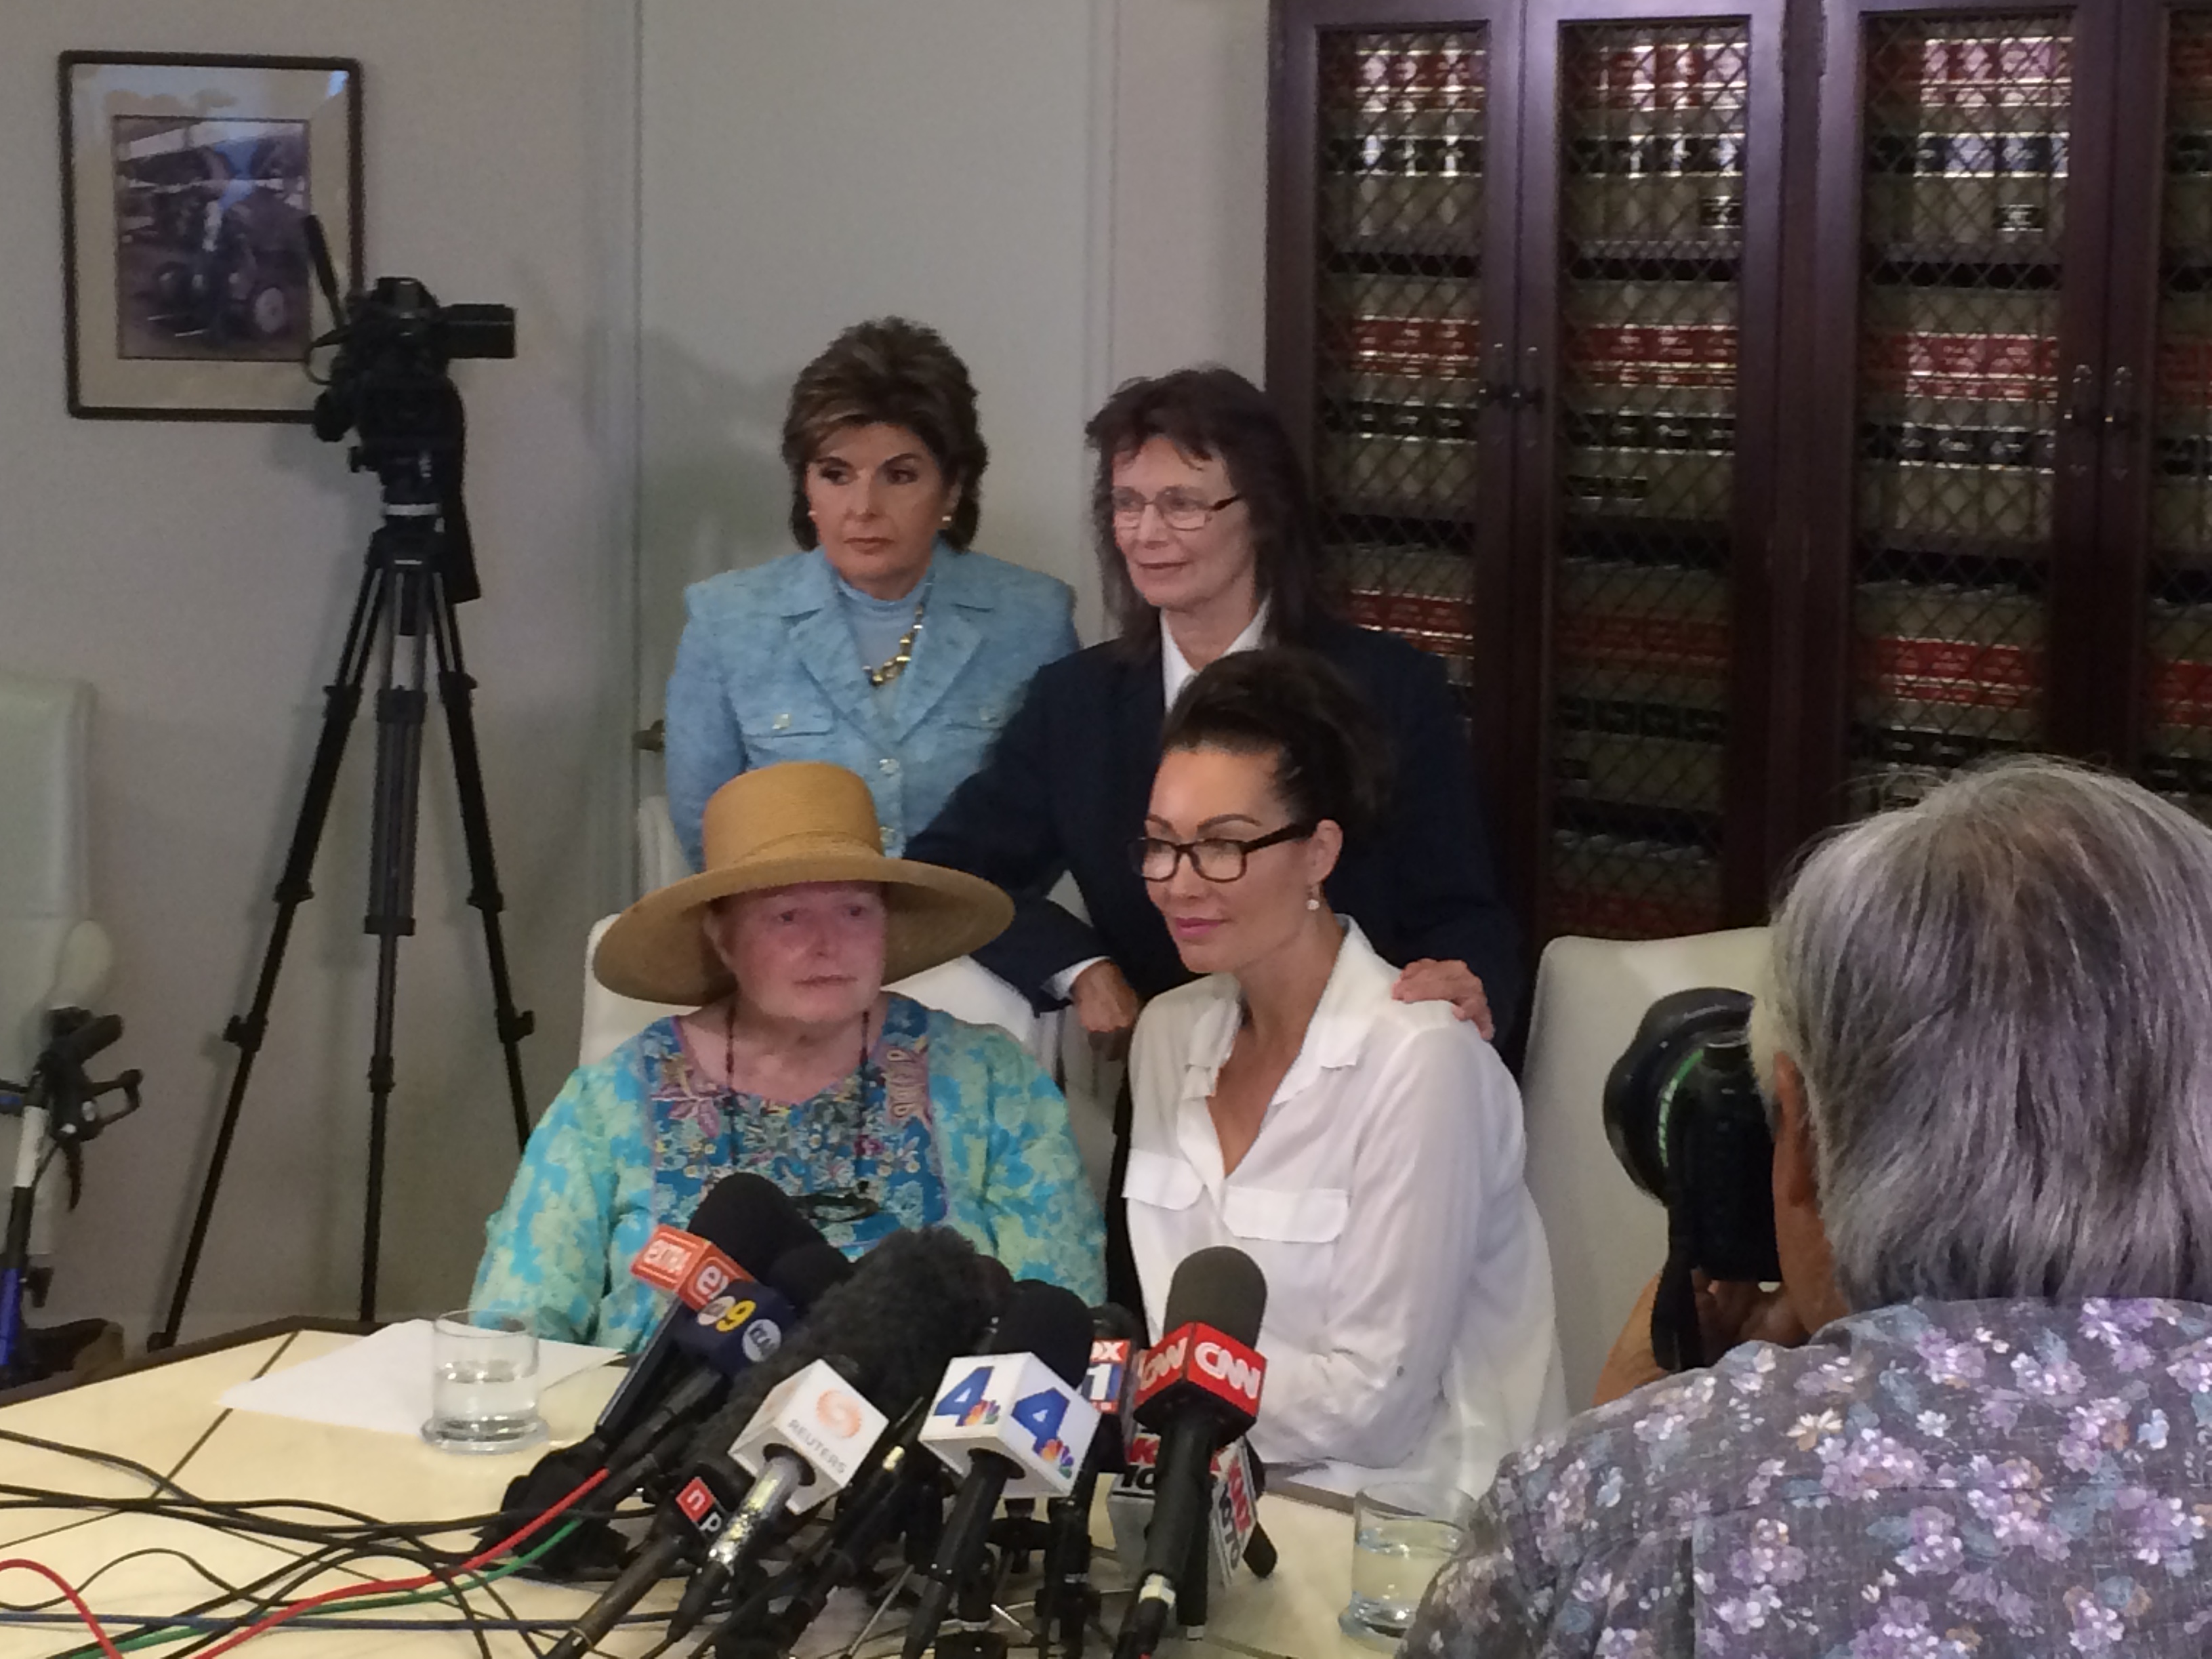 REUTERS: Three more women accuse Bill Cosby of decades-old assaults